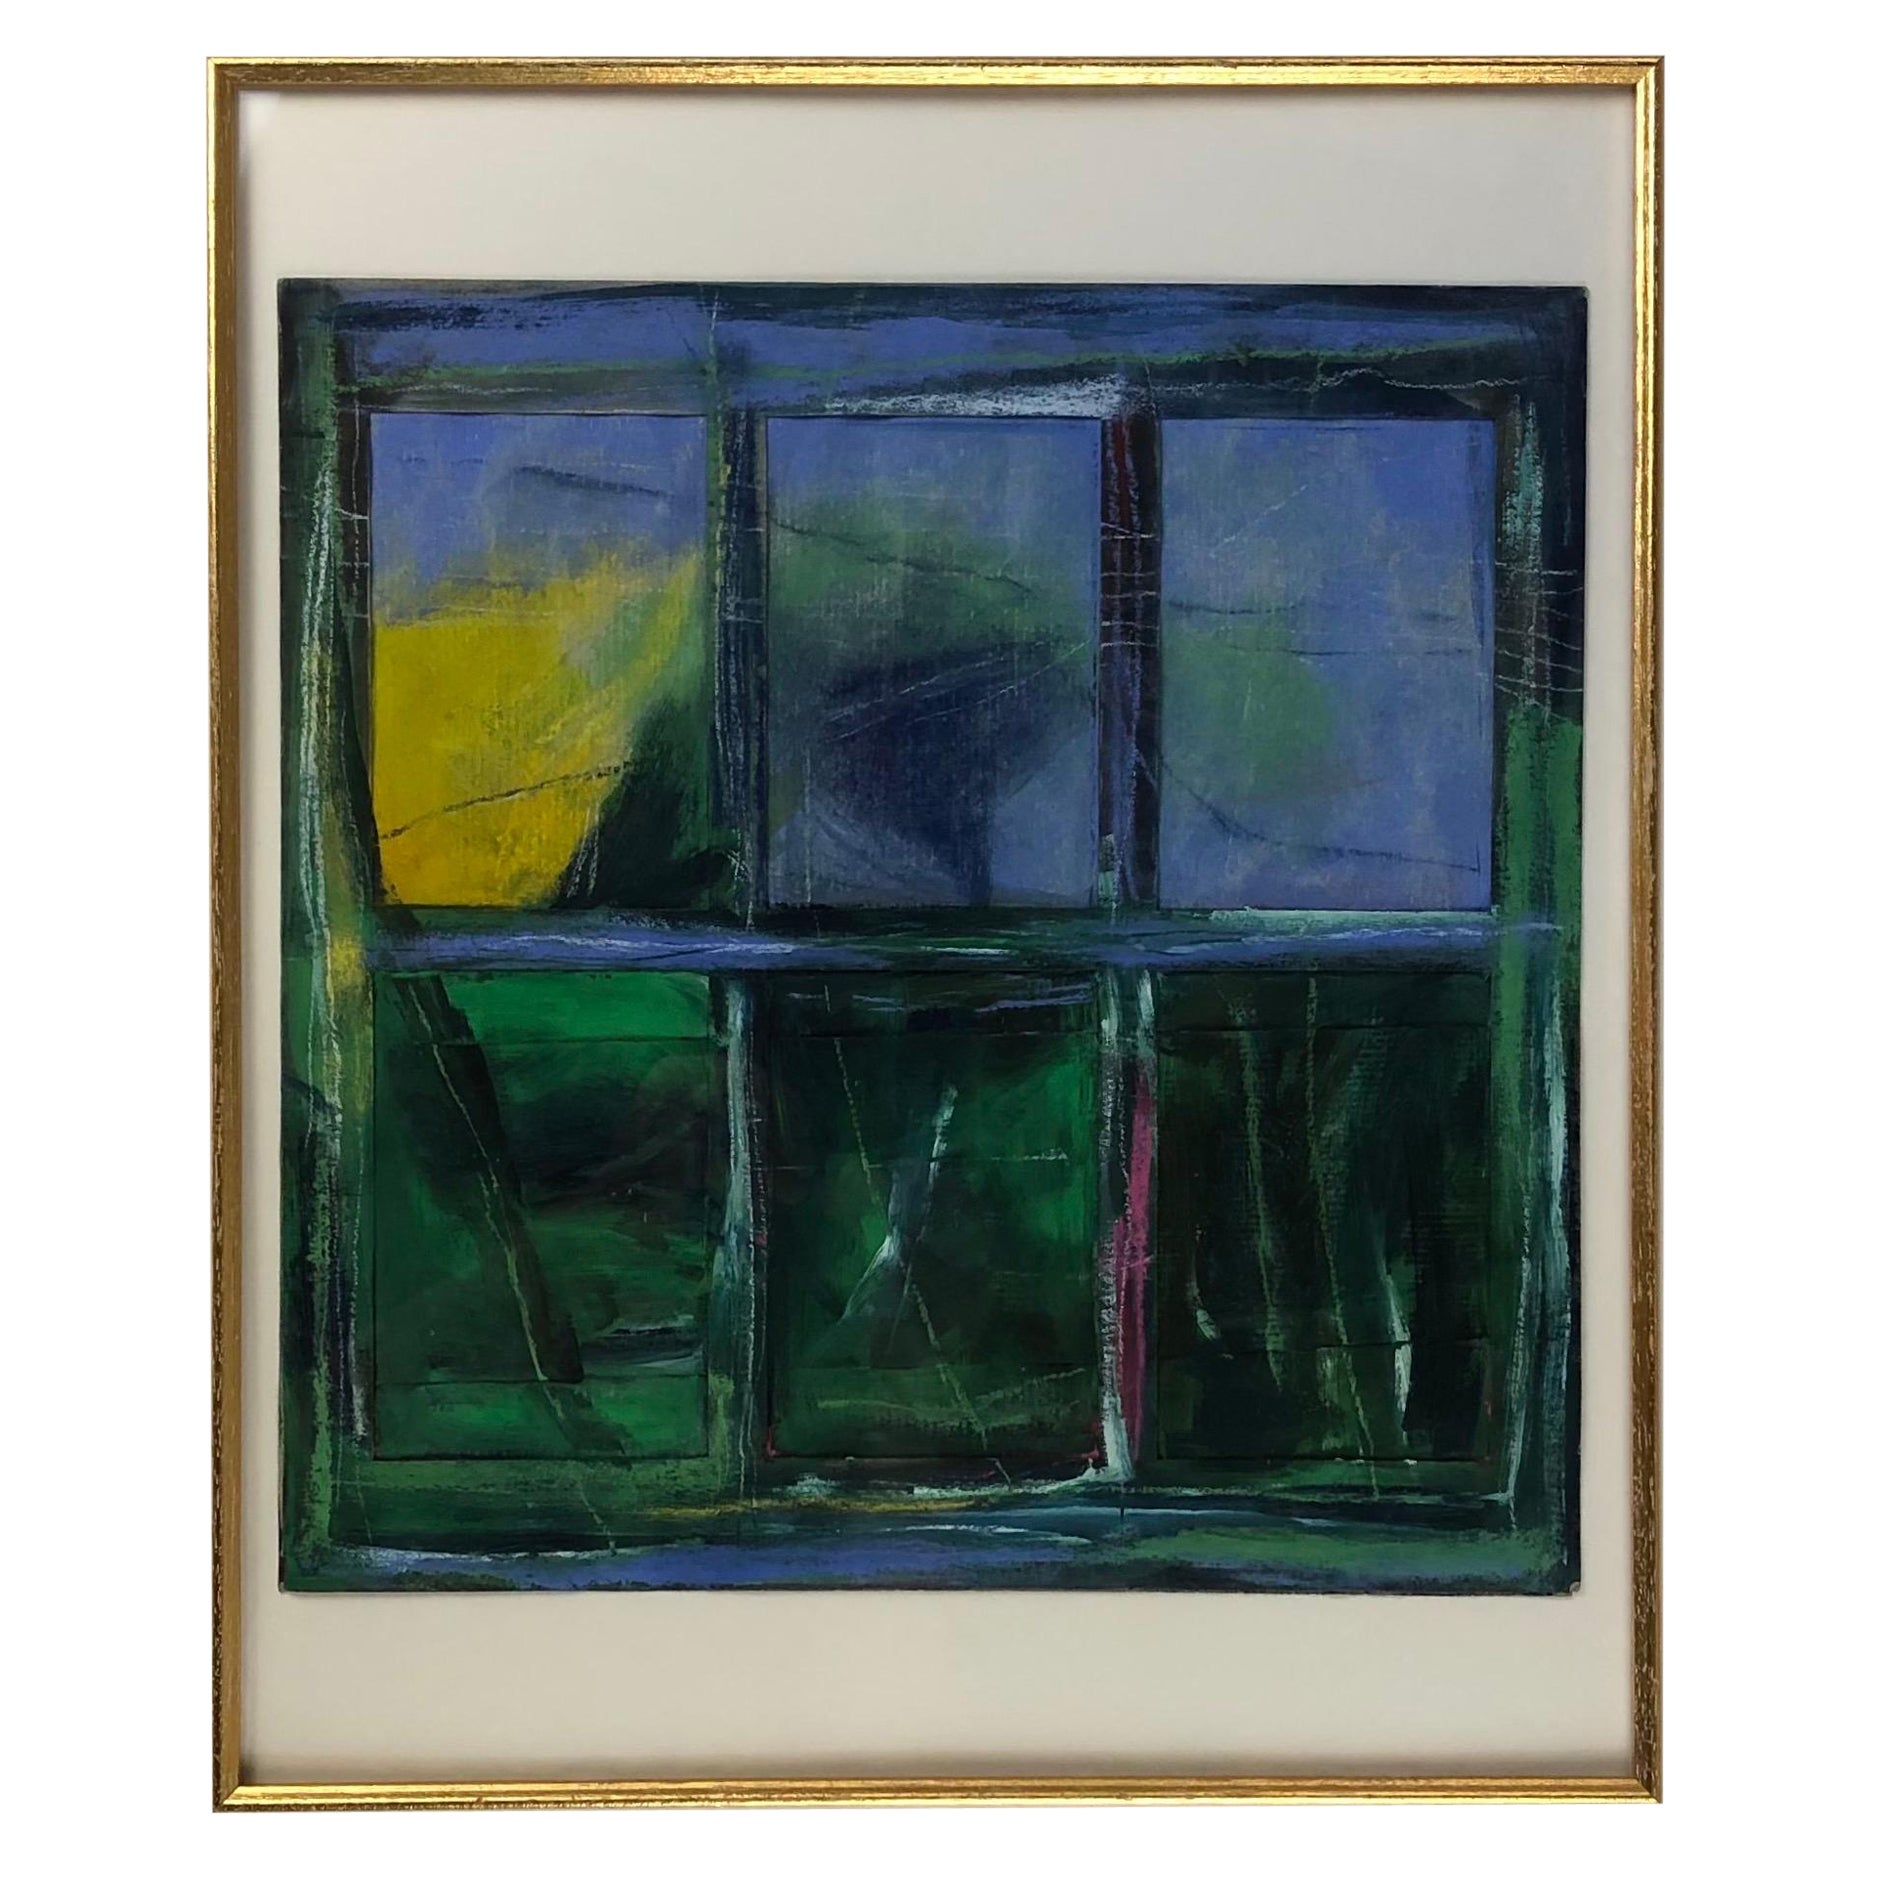 Original Abstract Composition by C. Azuelos, Imaginary Window